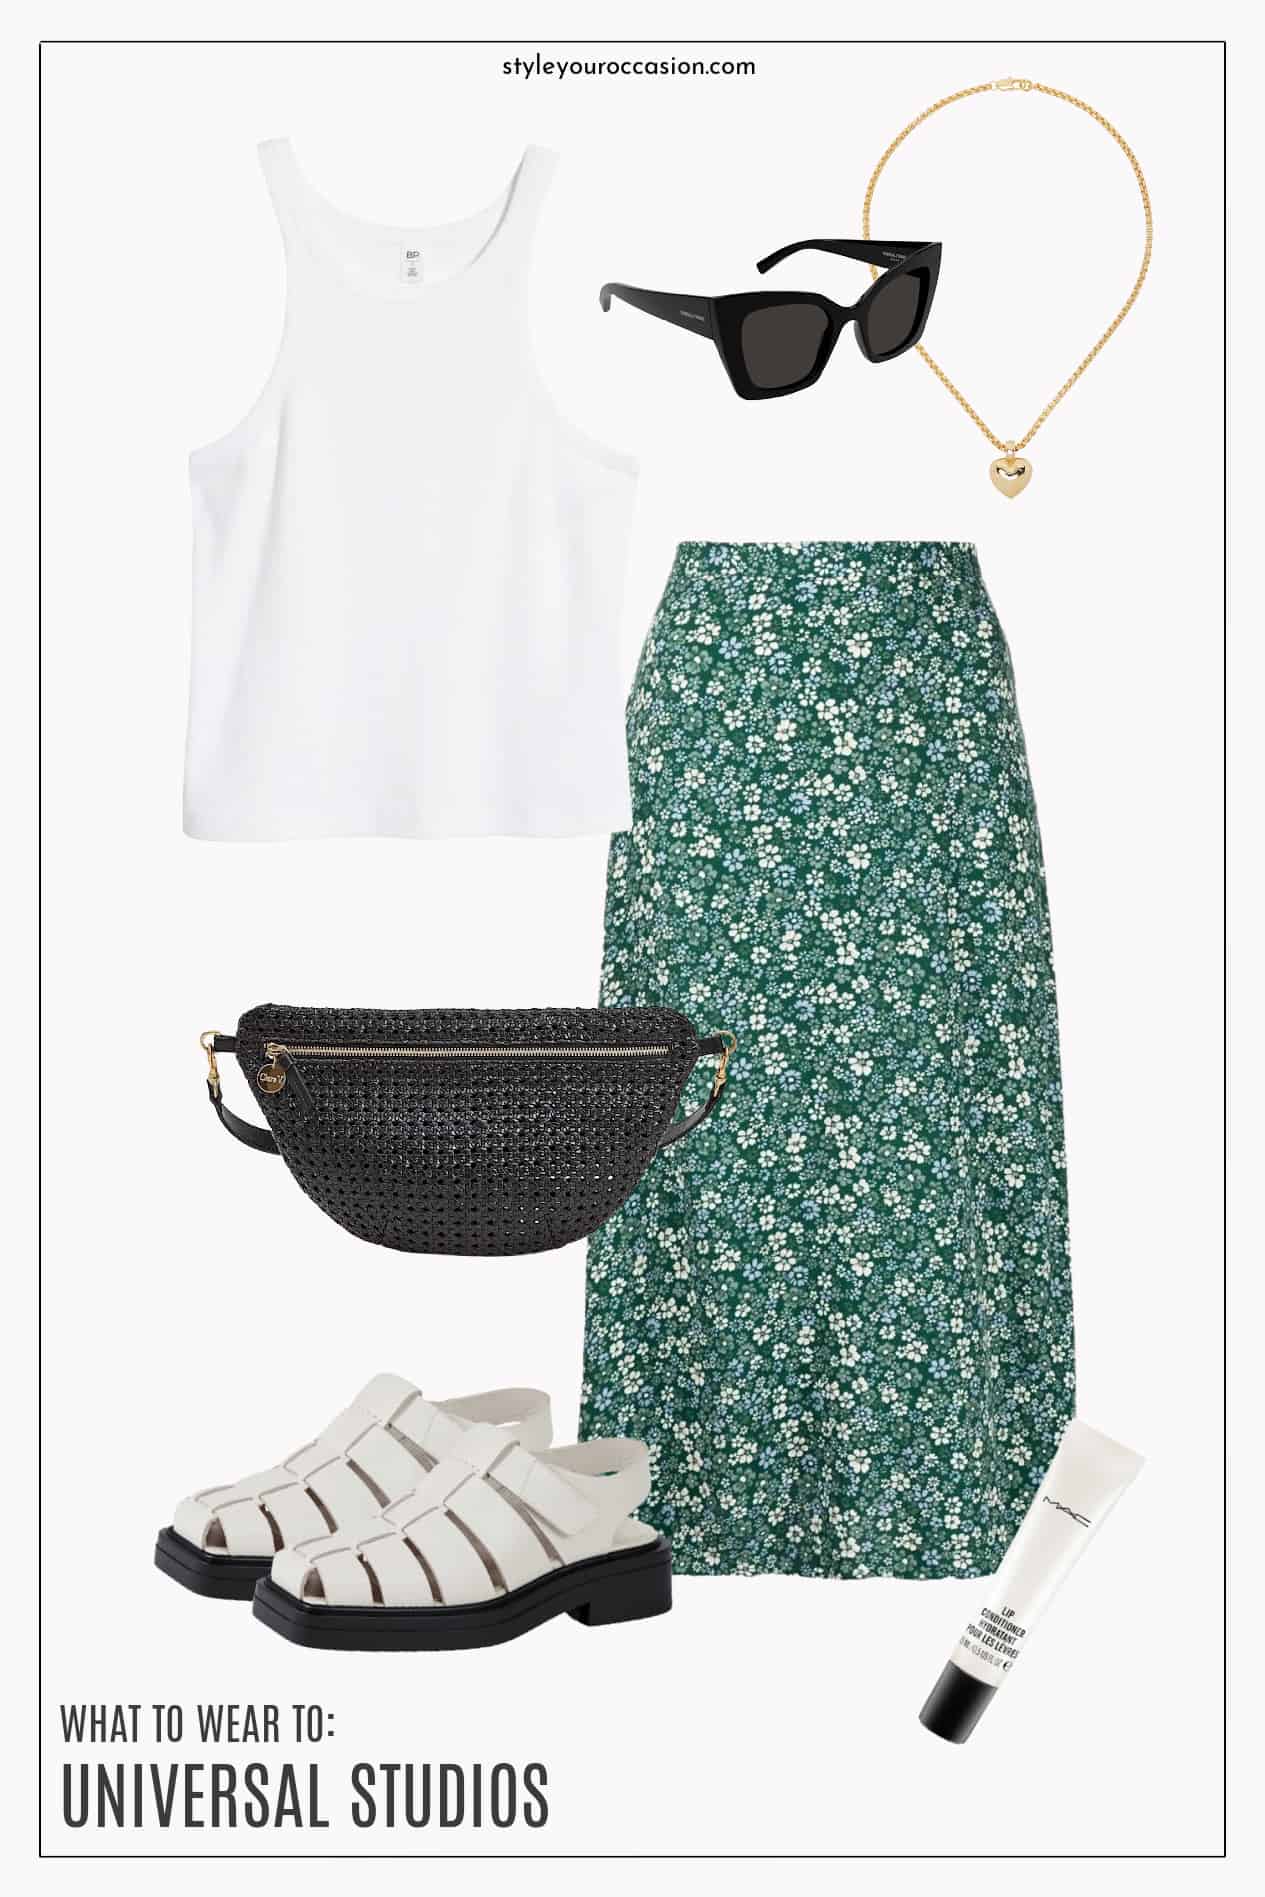 A Universal Studios outfit style board with a white and green floral patterned midi skirt, a white tank top, a black belt bag, strappy white sandals, black sunglasses, and a gold necklace